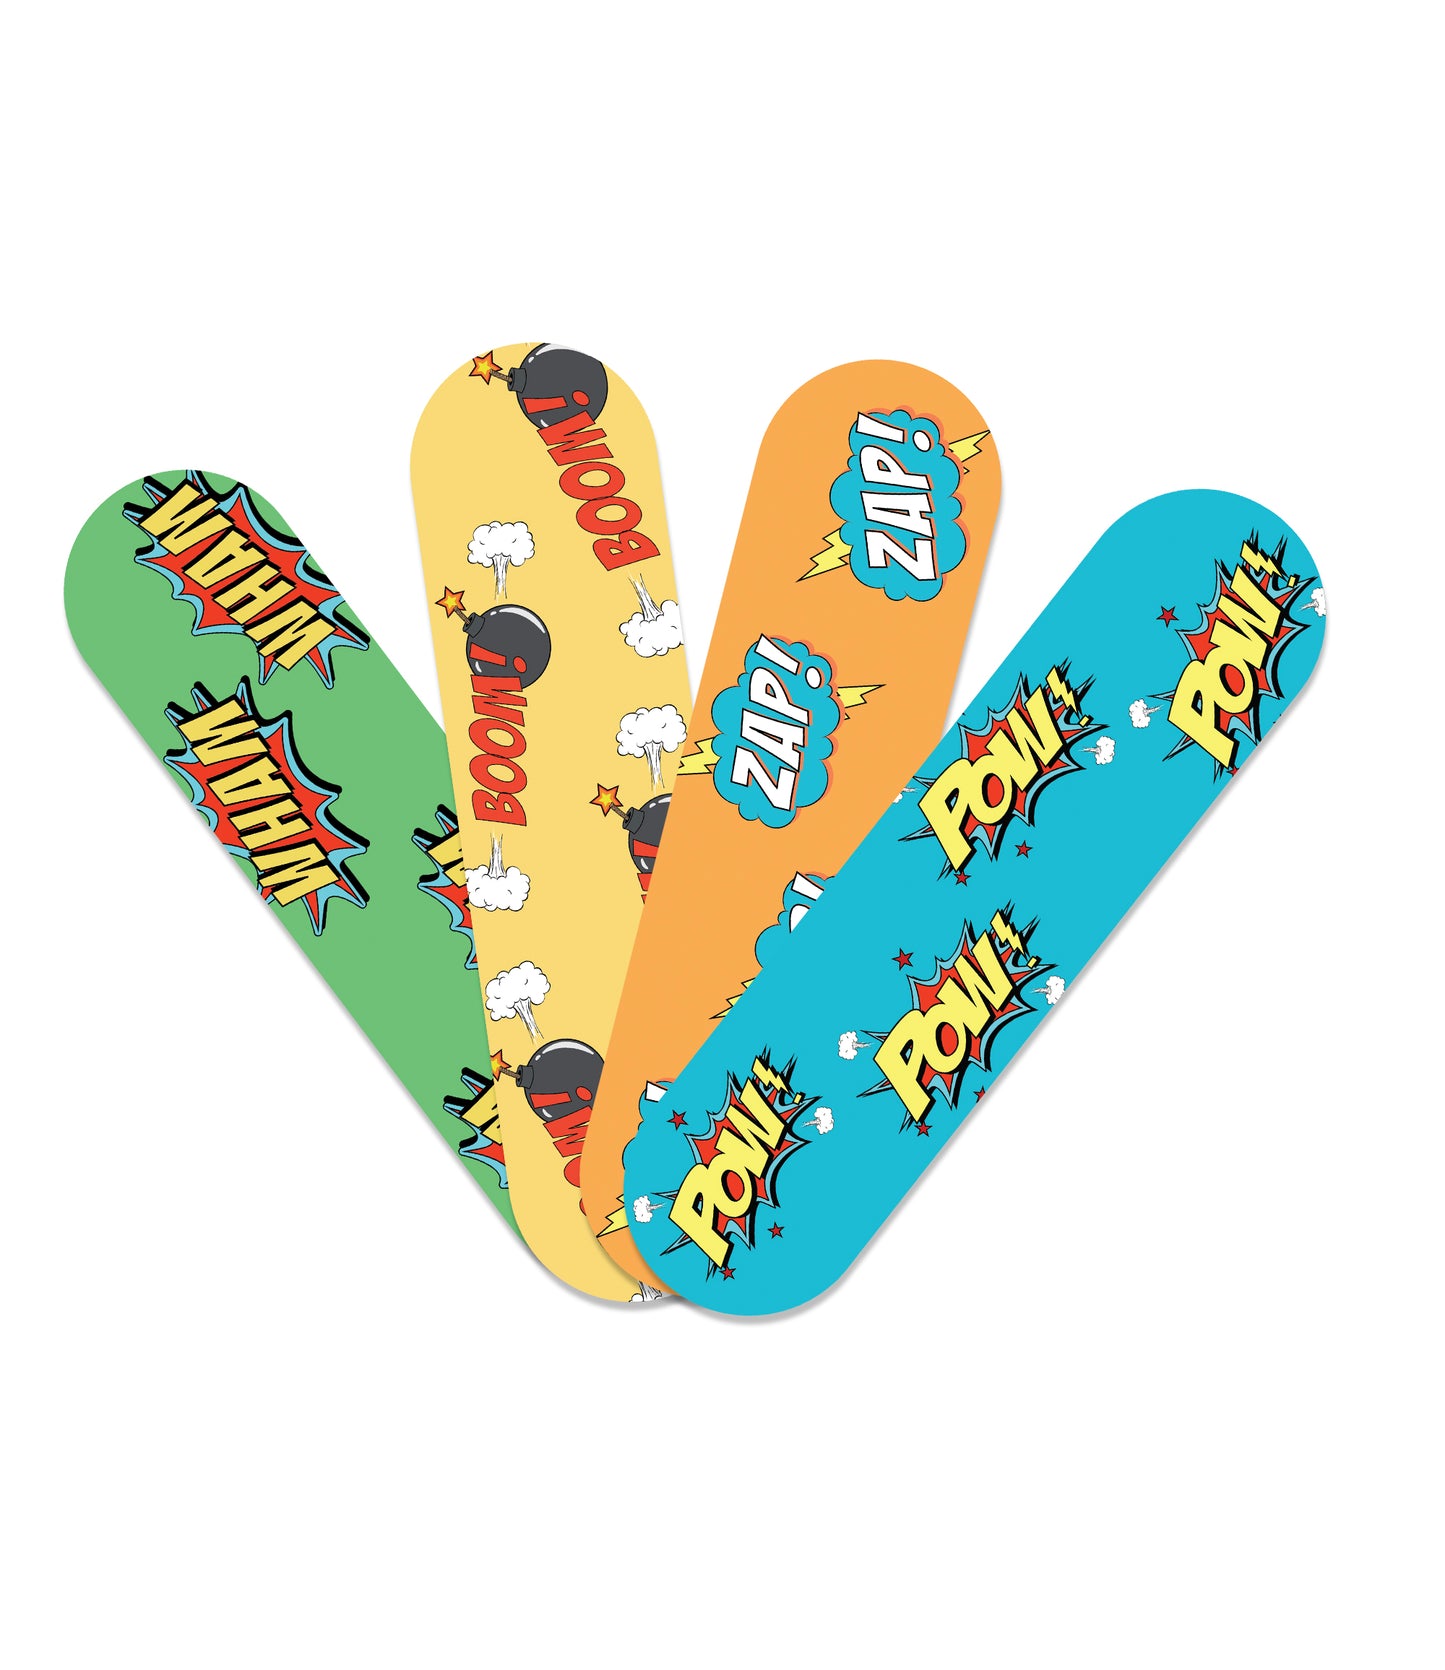 Ouchie Kids Bandages Pack of 20 - Comic